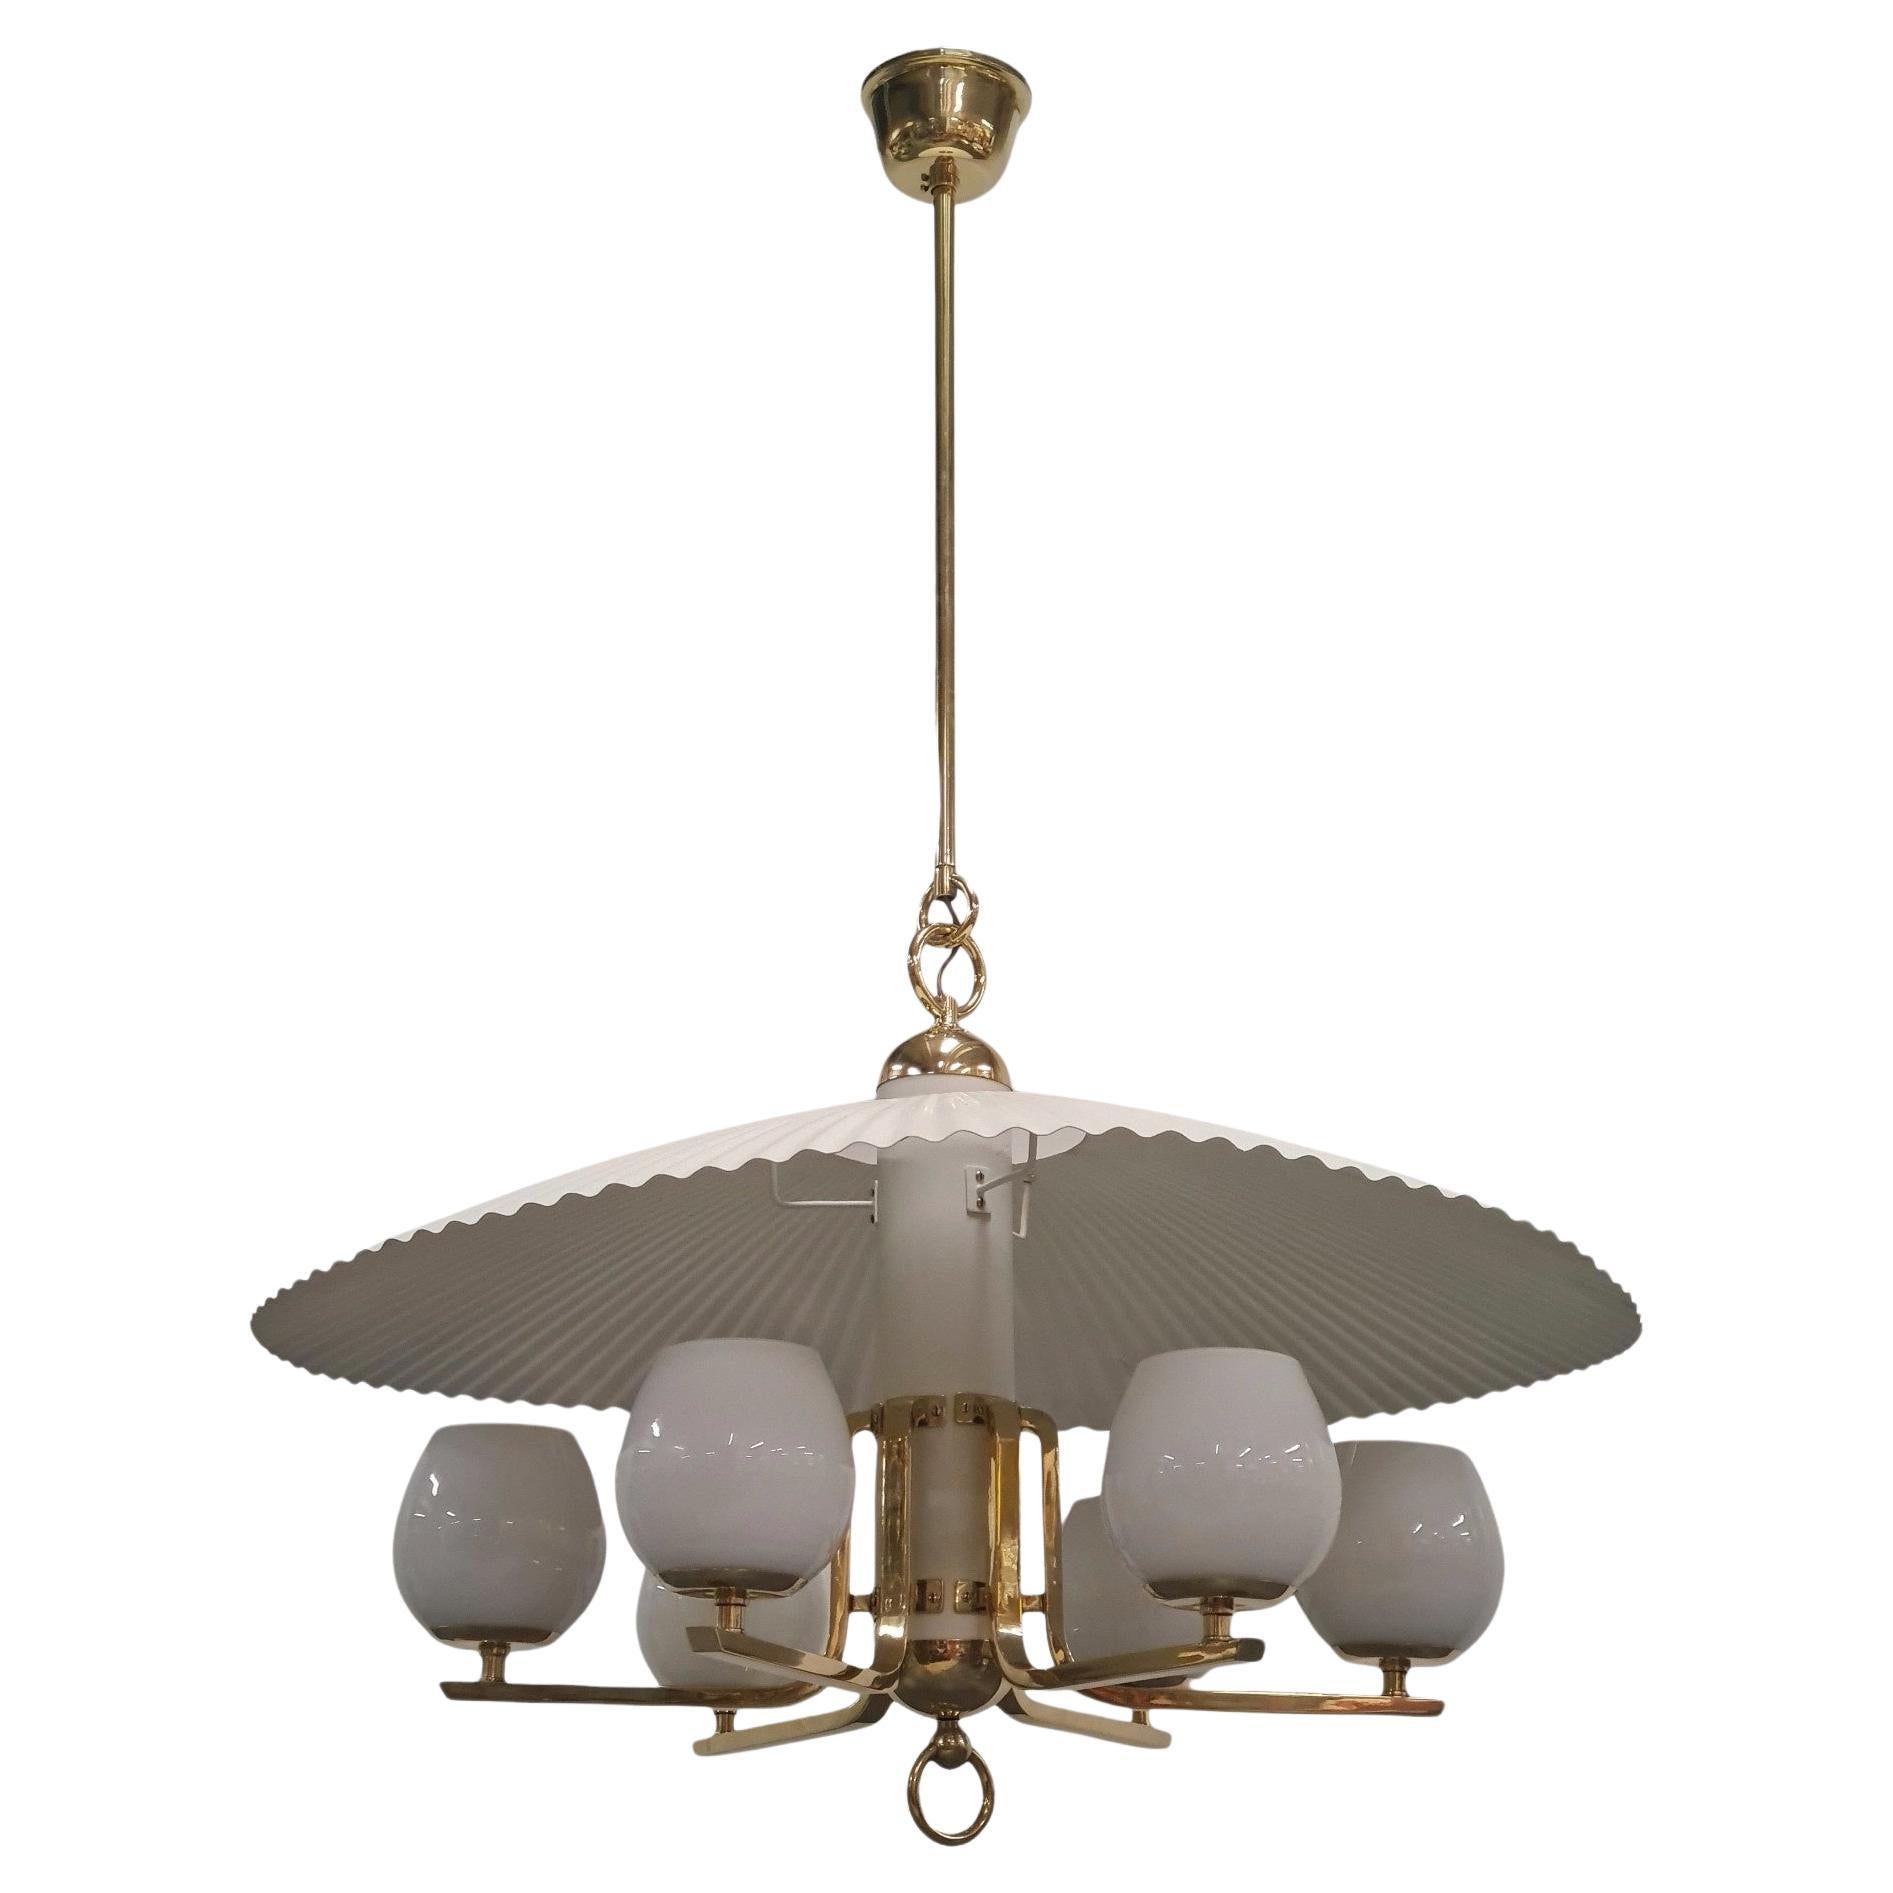 This is by far one of the most beautiful Tynell ceiling lamps we have come across in our 30 year career.

We believe this lamp is from the 1940s because of the style and the combination of materials used. Wood and sheet metal were much easier to